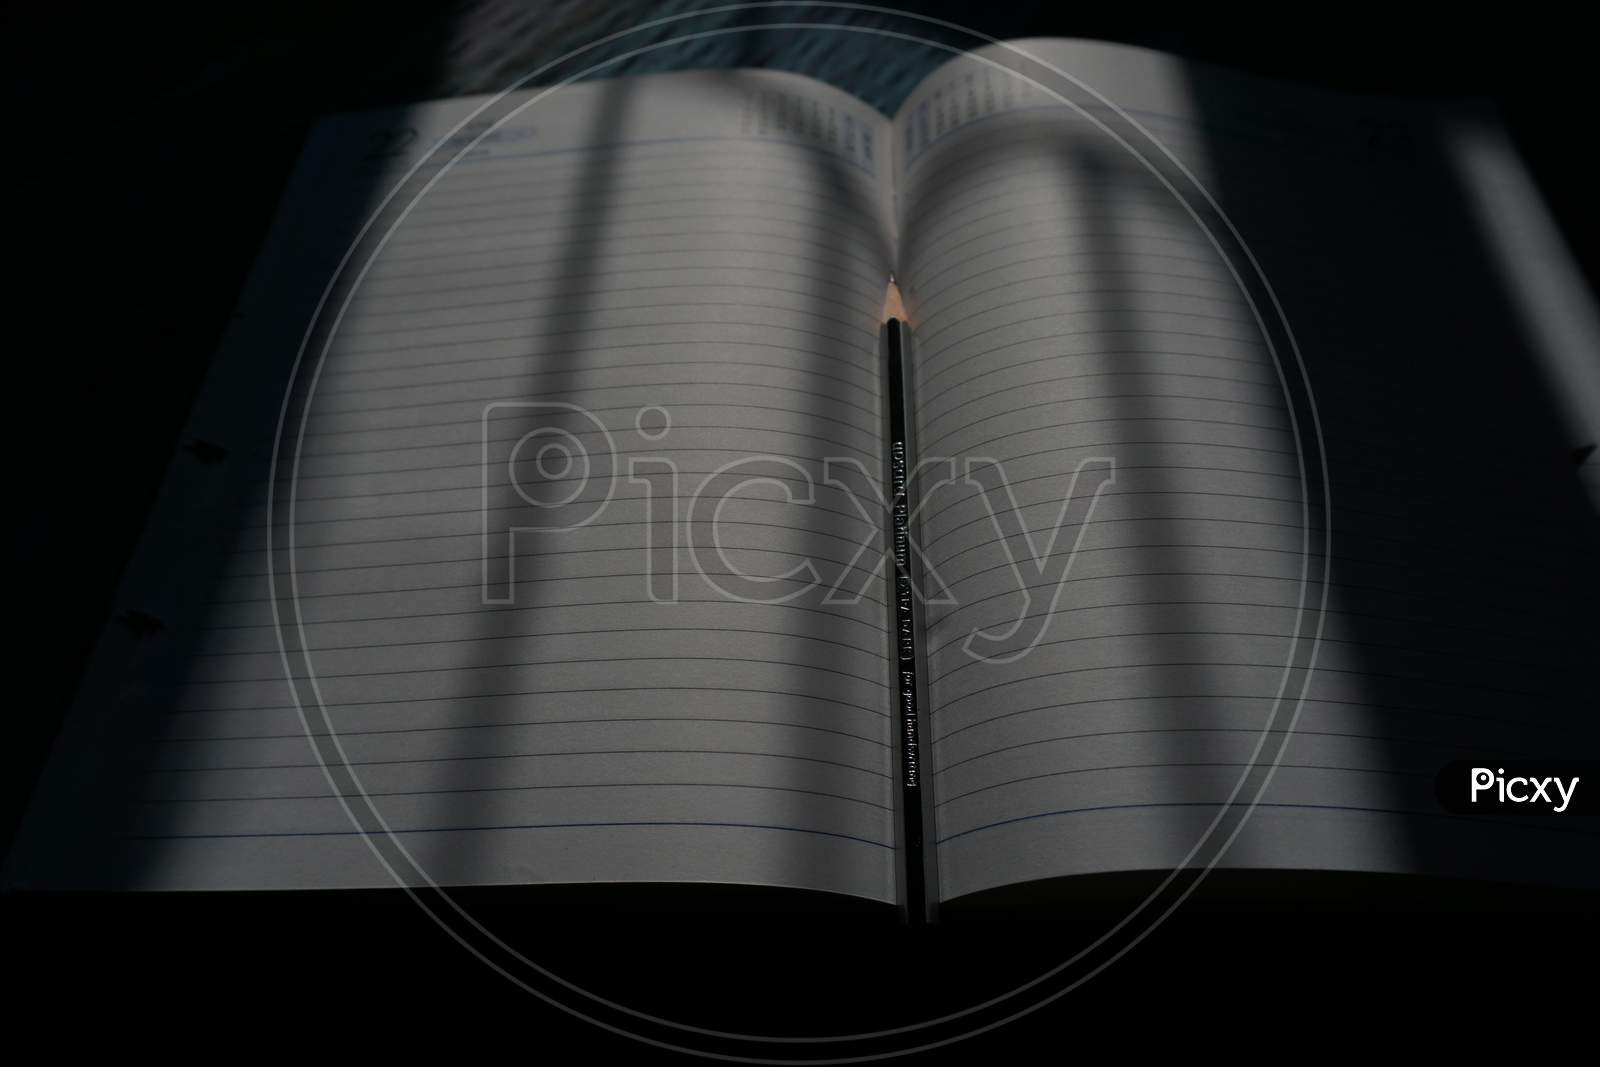 Notebook in middle pencil for writing the thought and quote